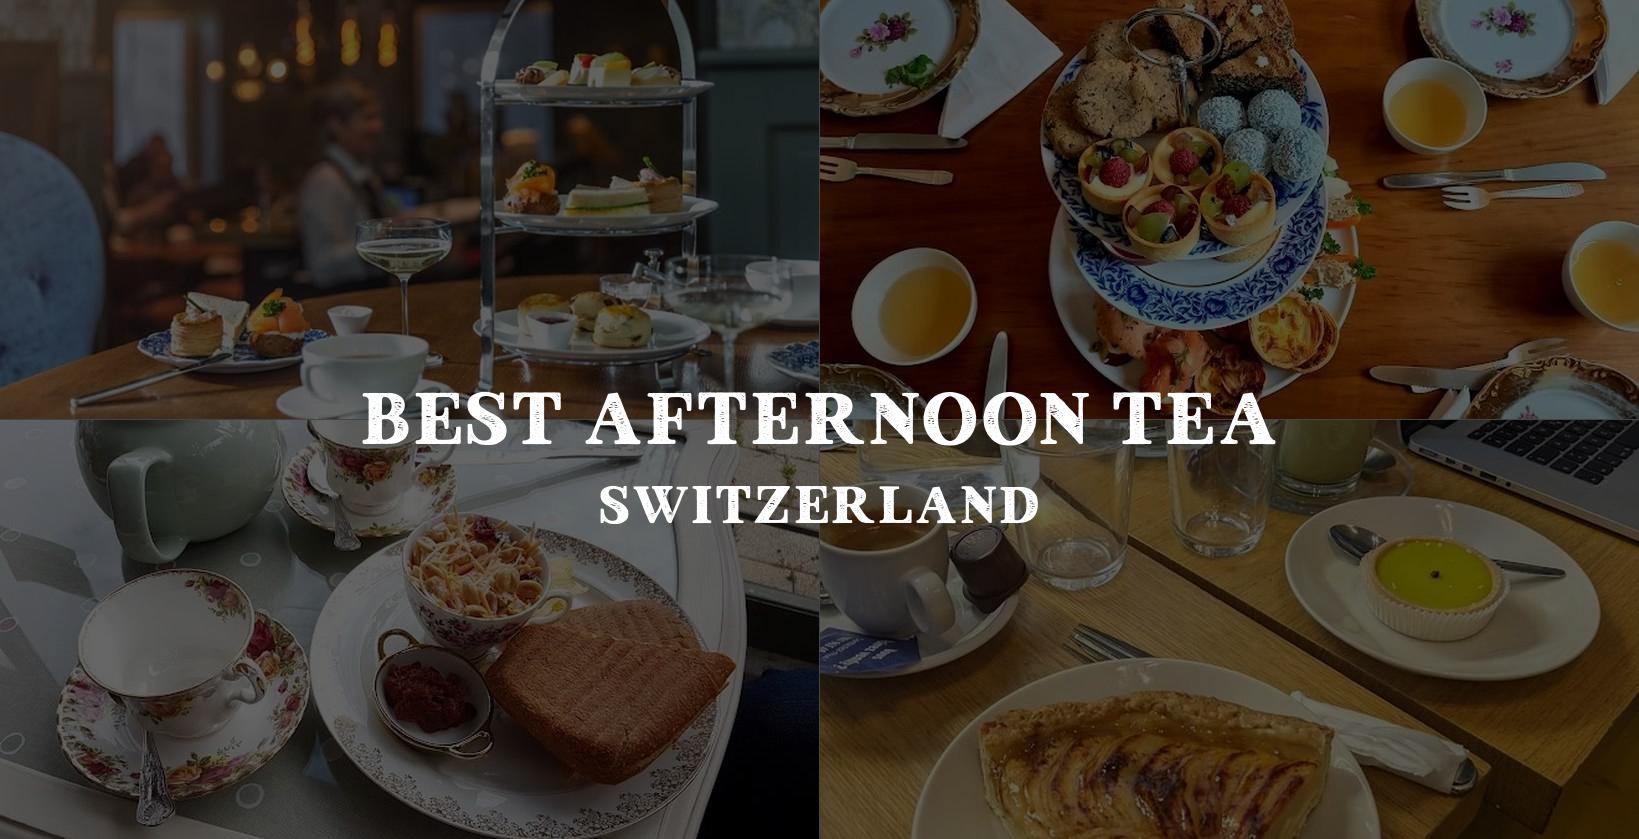 Choosing the perfect spot for afternoon tea in Switzerland